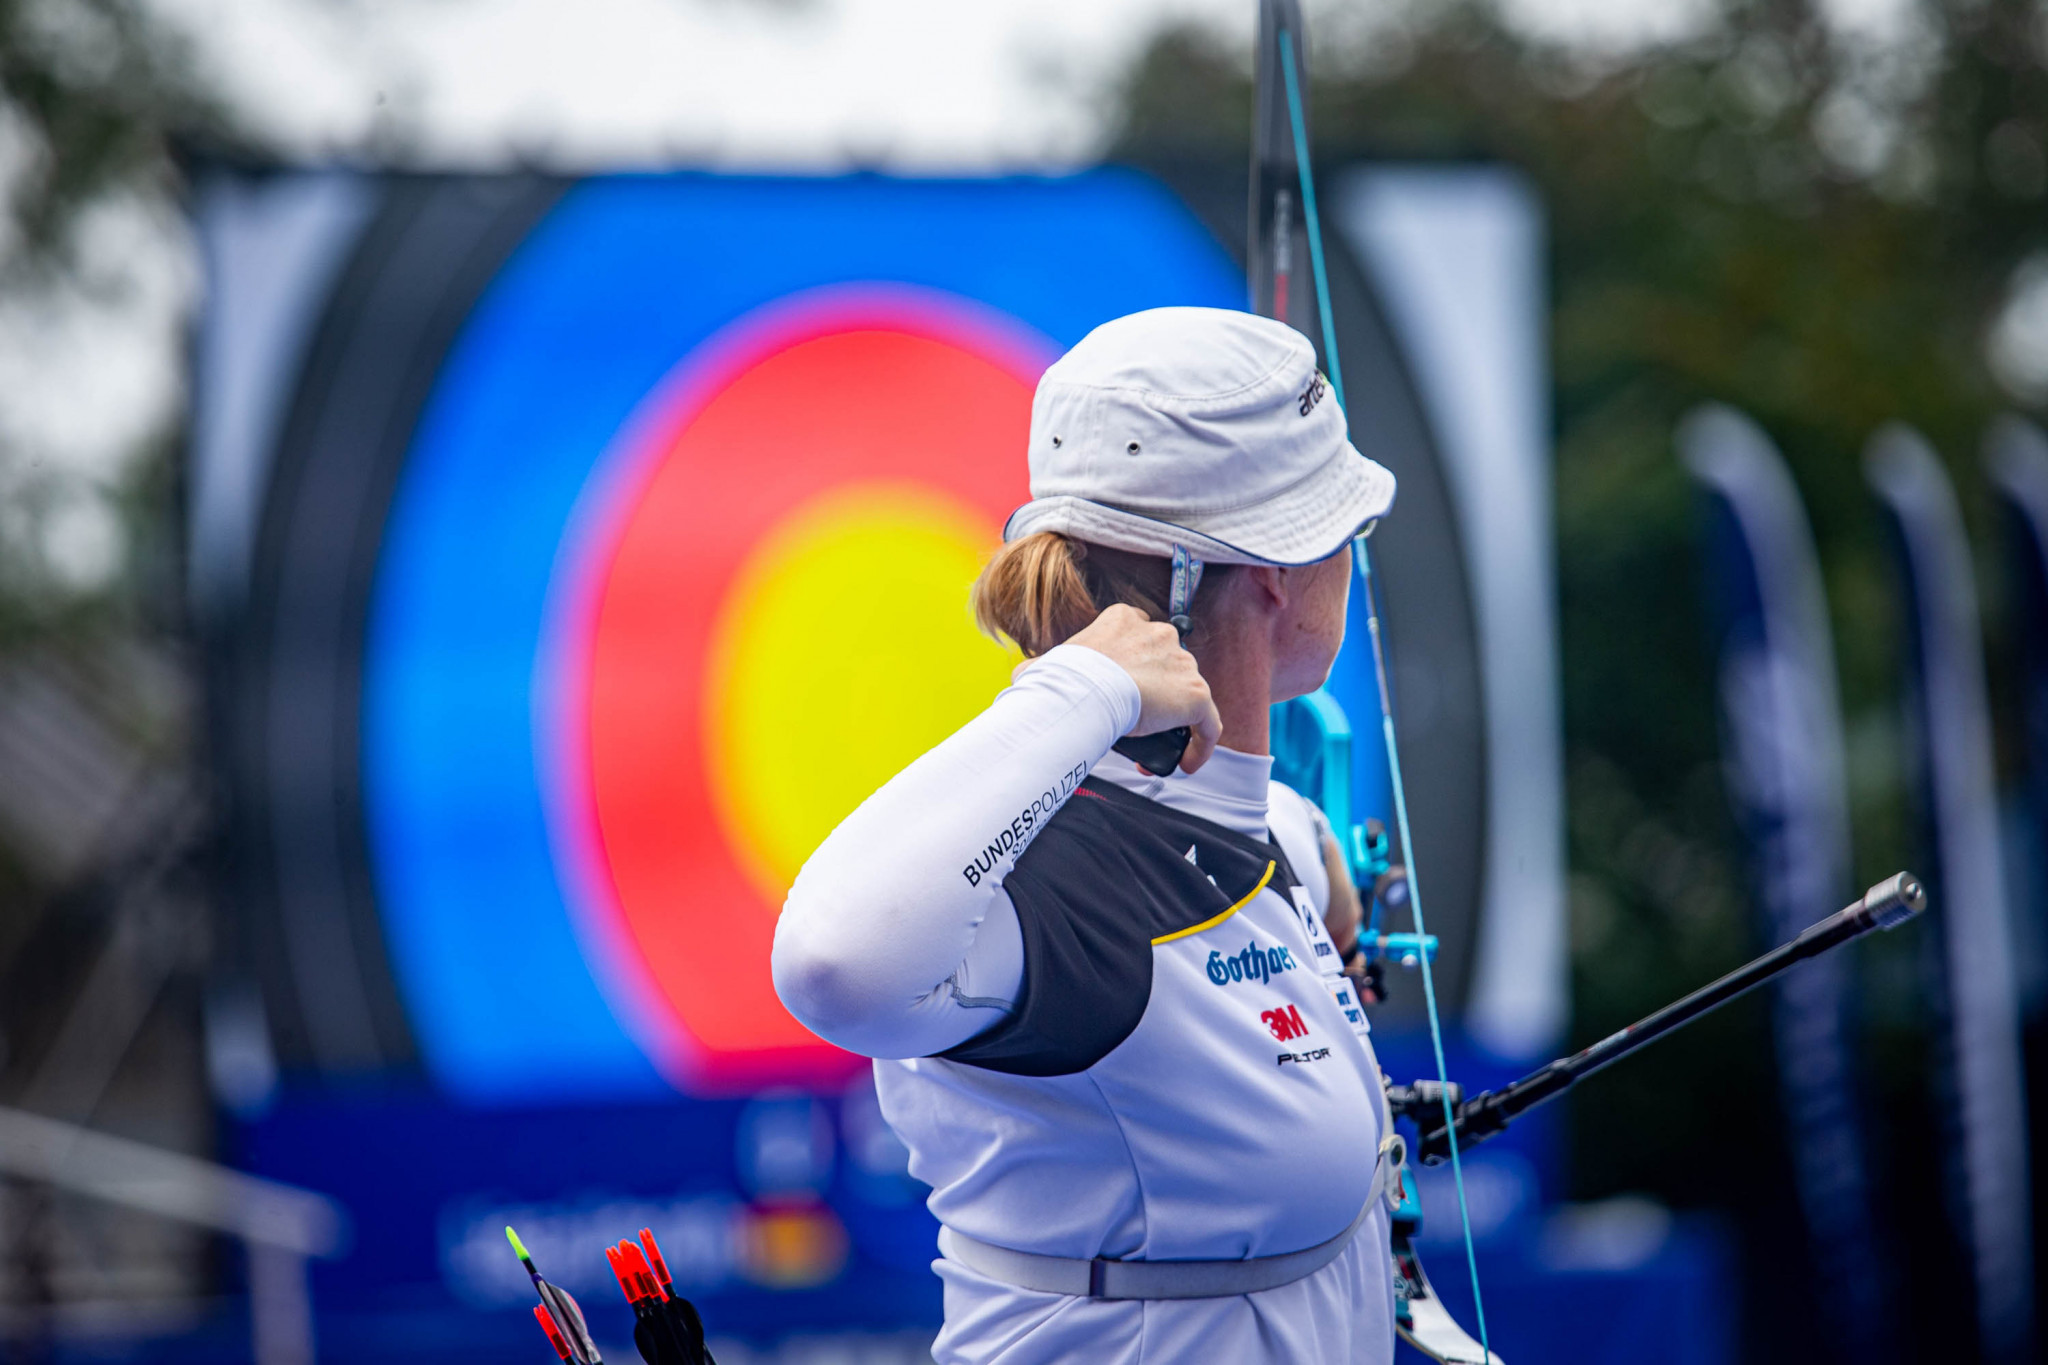 World Archery has renewed partnership deals with Sony Pictures Networks India, QTV Media and Broadreach ©Getty Images